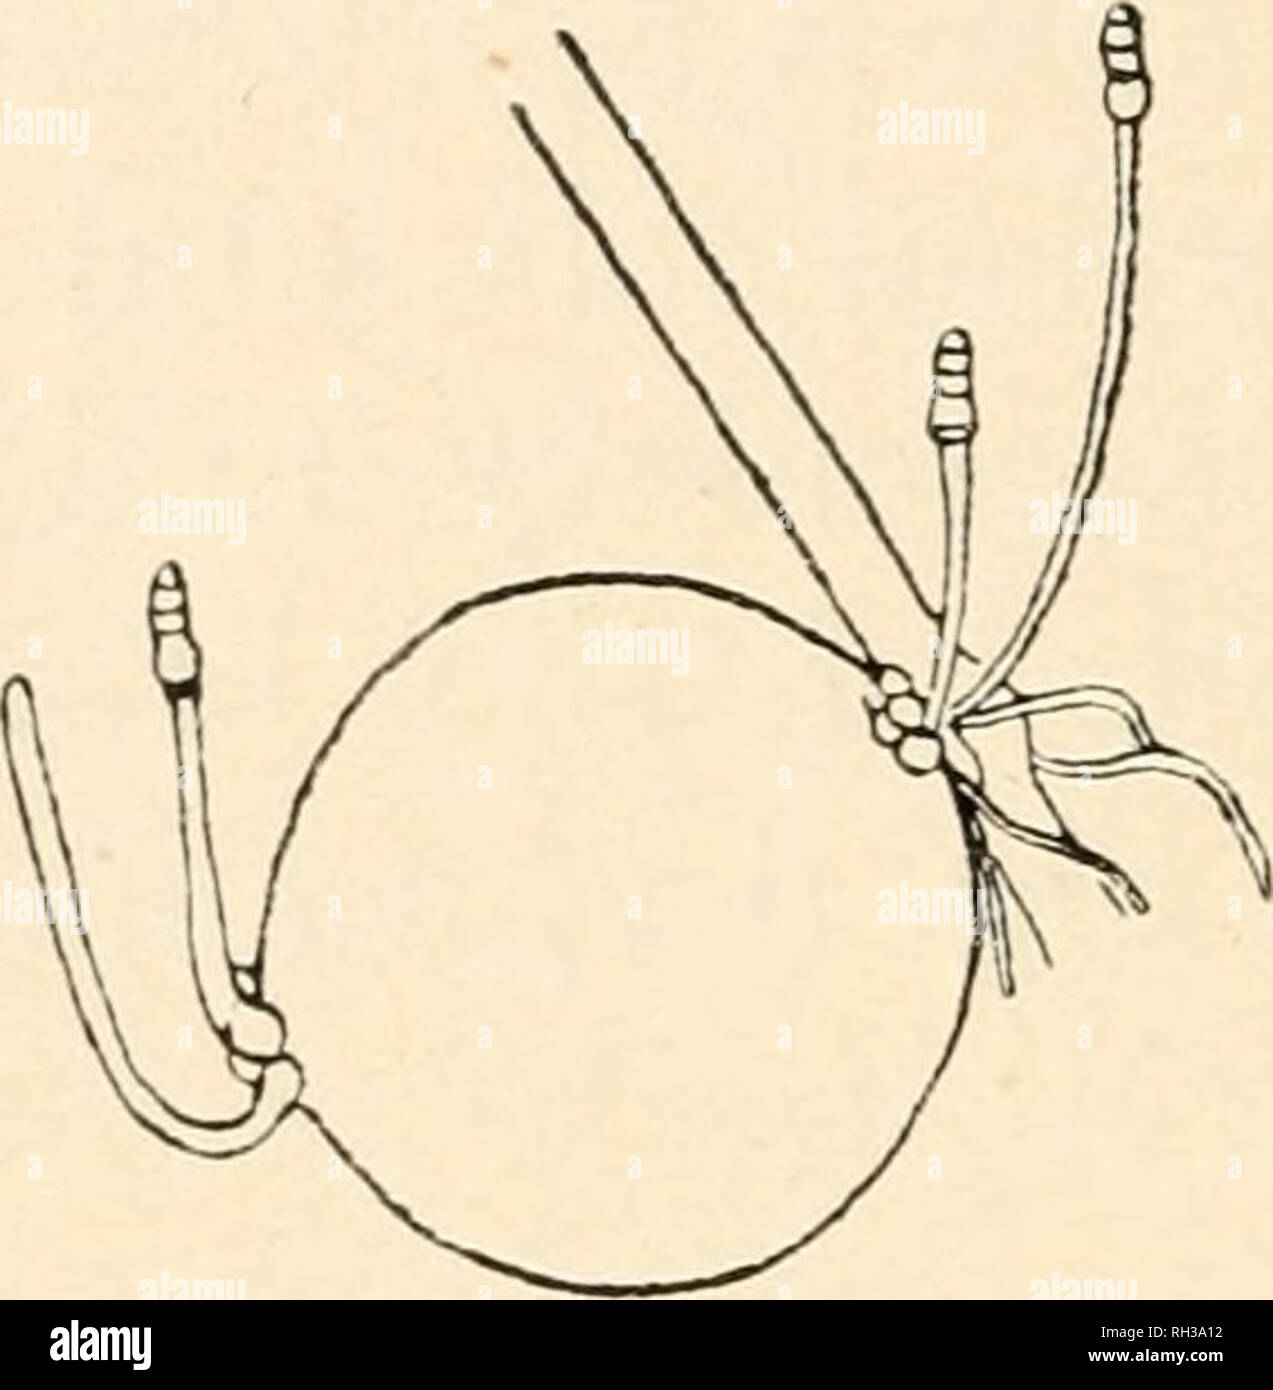 . The British Charophyta. Characeae -- Great Britain. Fia. 11.—Root-bulbils (spherical type) of Char a aspera (after Giesenhagen). i. Root-node showing double-footed joint with three bulbils, two nearly spherical, and one cylindrical; also some rhizoids ( x c. 11). ii. Root-node bearing one spherical bulbil, with young plants arising from nodes at basal and distal ends ( x c. 13). Charophyte throughout the year either in its natural condition or in cultivation will do well to examine the roots from time to time to ascertain if bulbils are being produced. There are three distinct types of bulbi Stock Photo